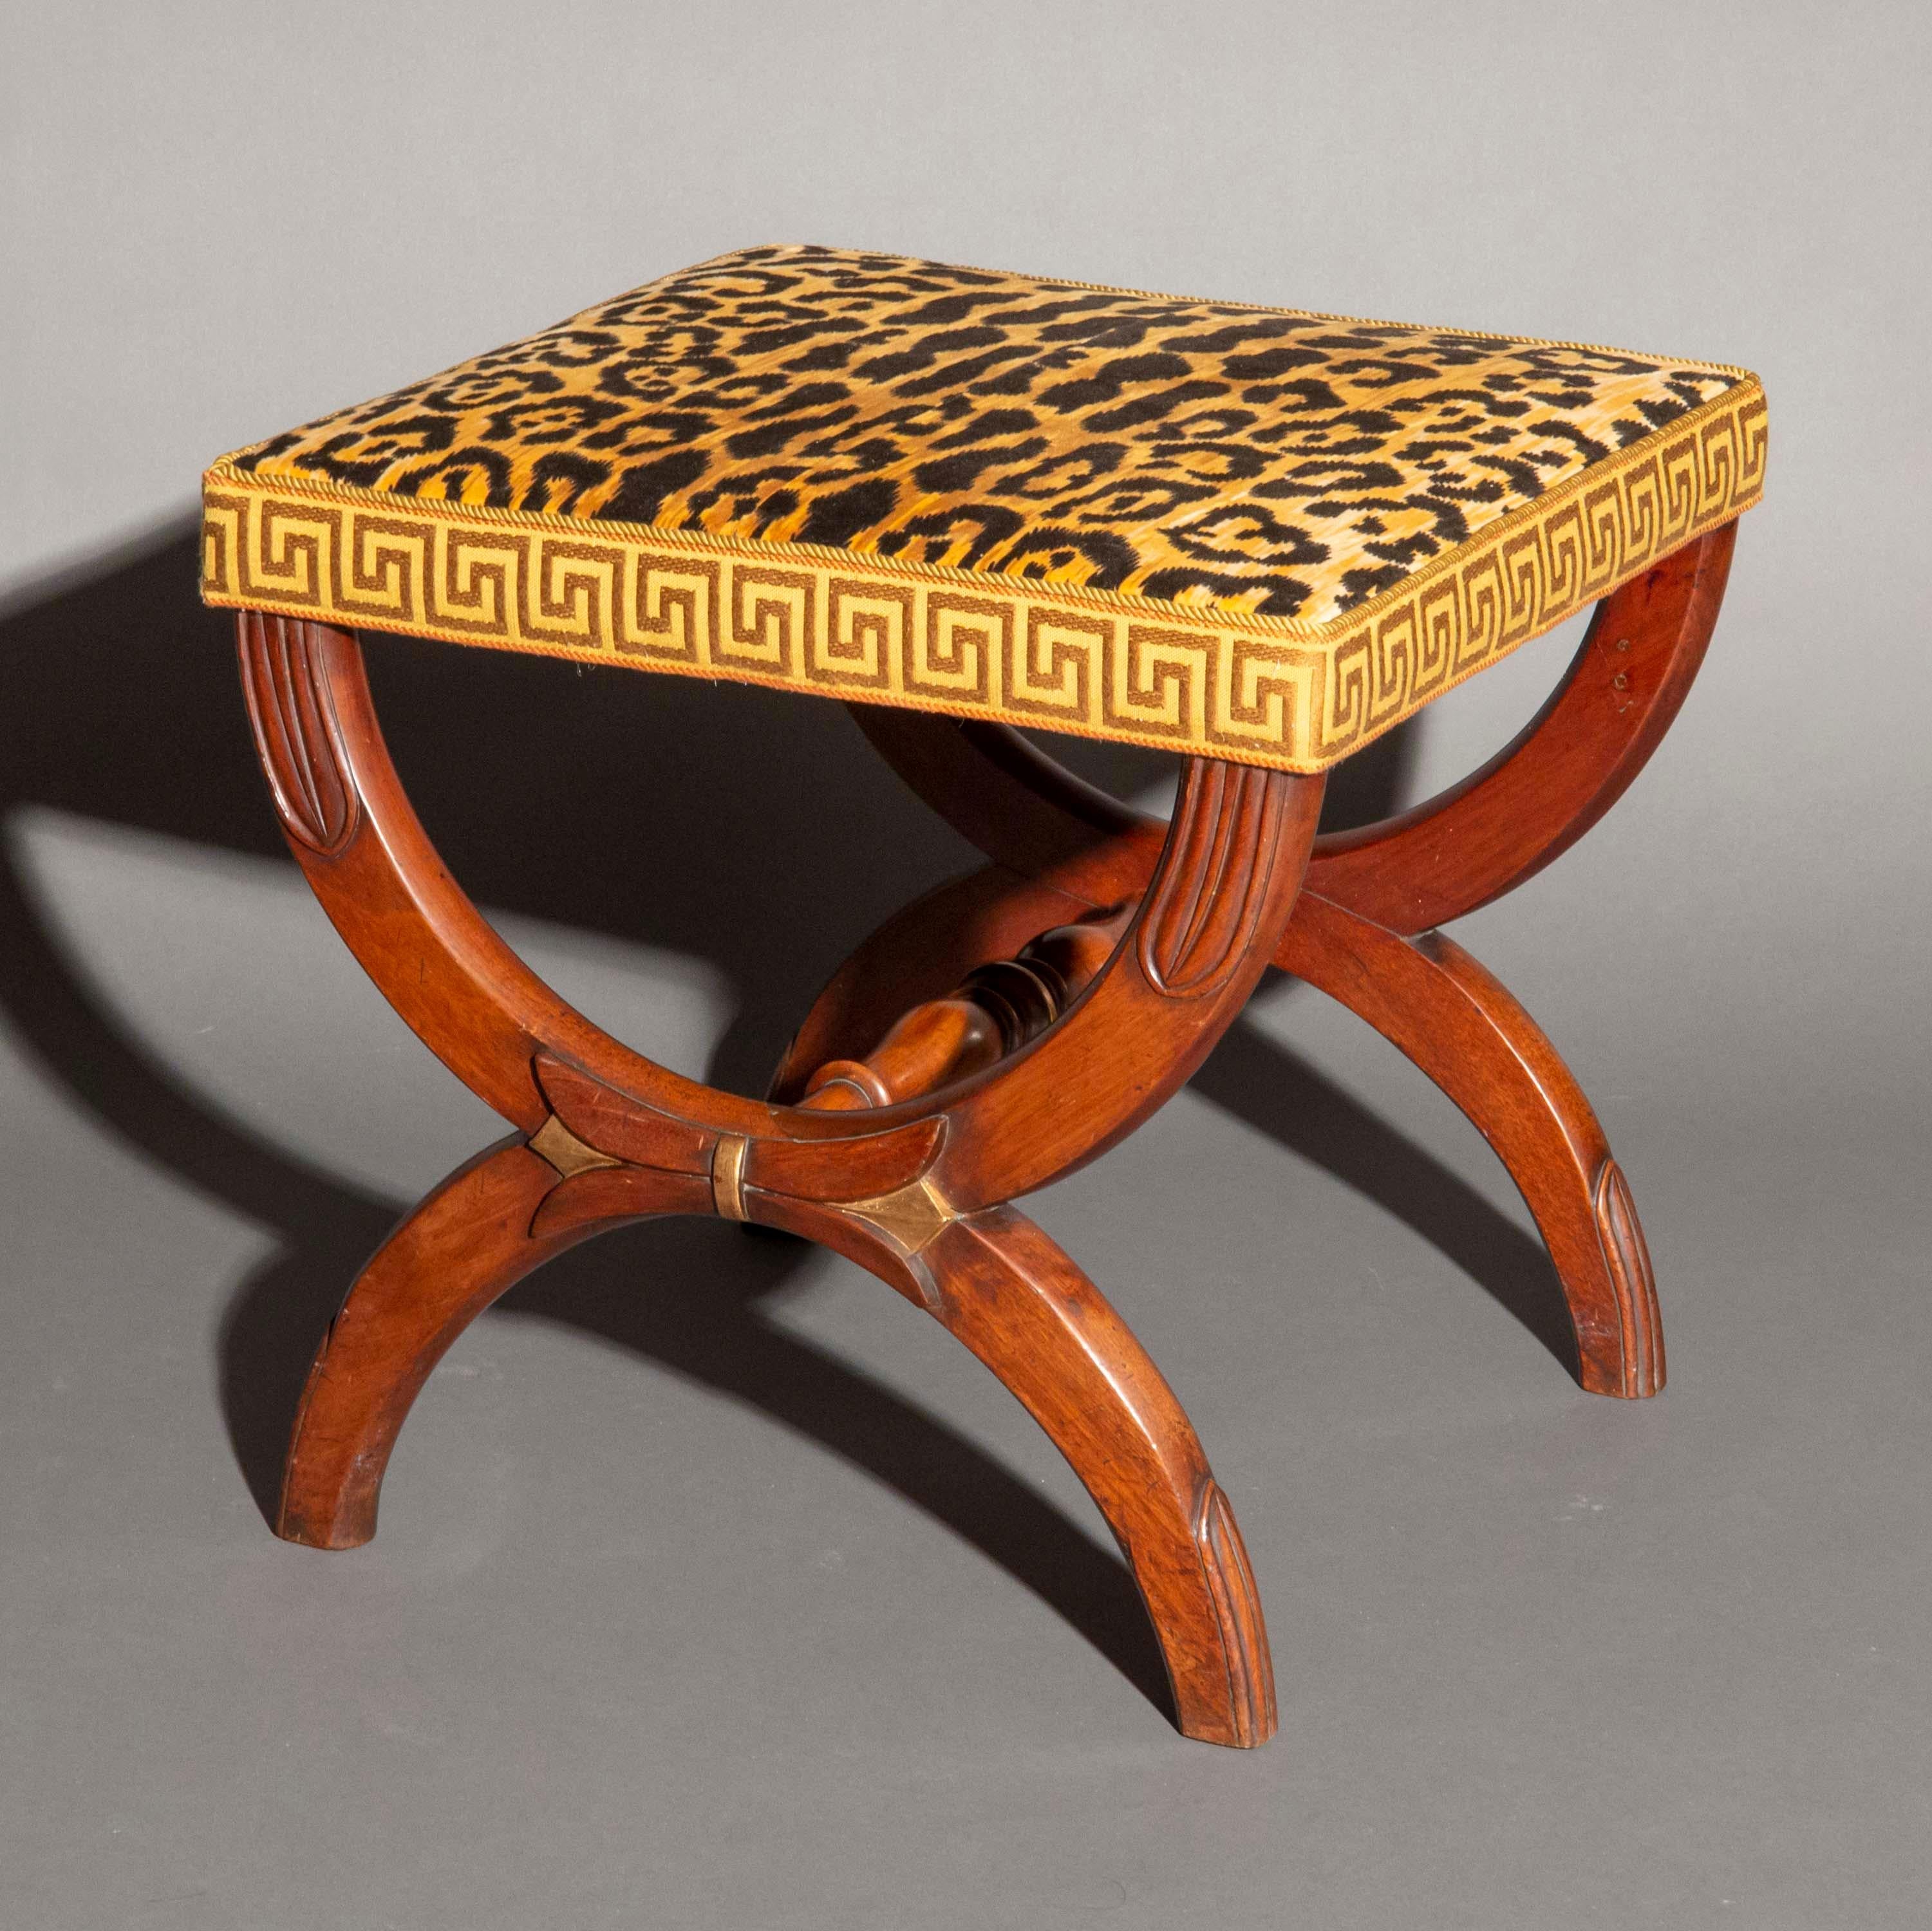 Carved Antique Curule Stool in Leopard Print and Greek Key Border